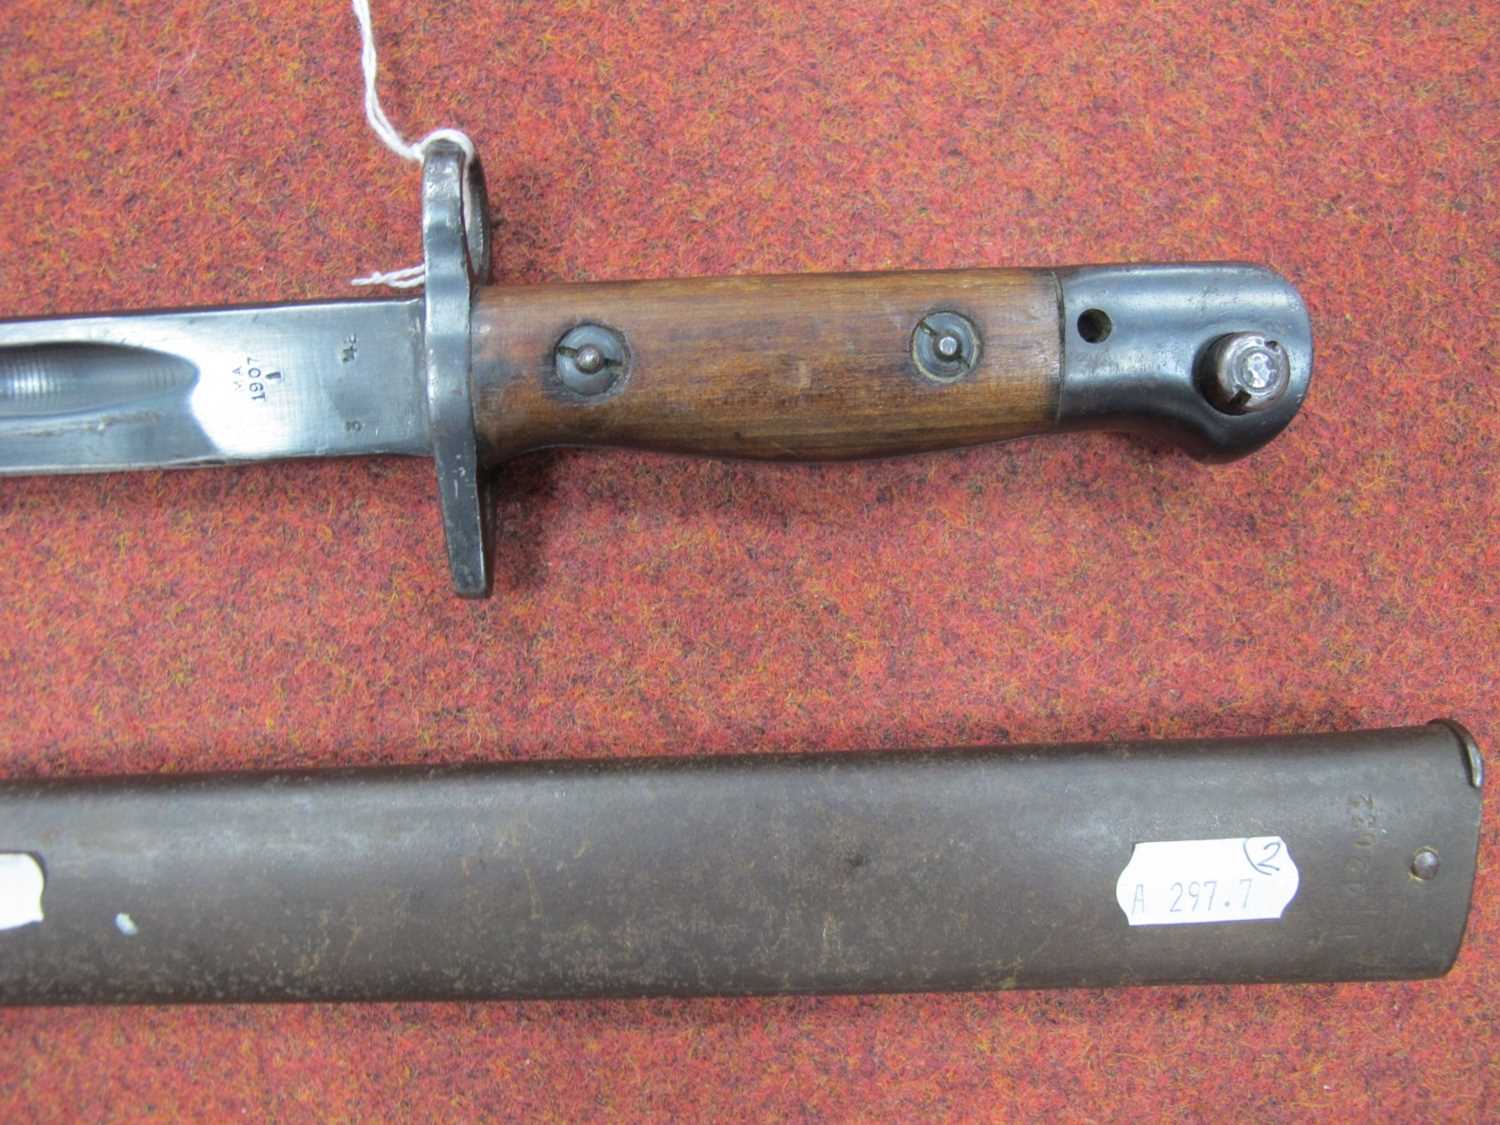 WWII Australian 1907 Pattern Bayonet, with various marks on blade including Year '42', - Image 11 of 11